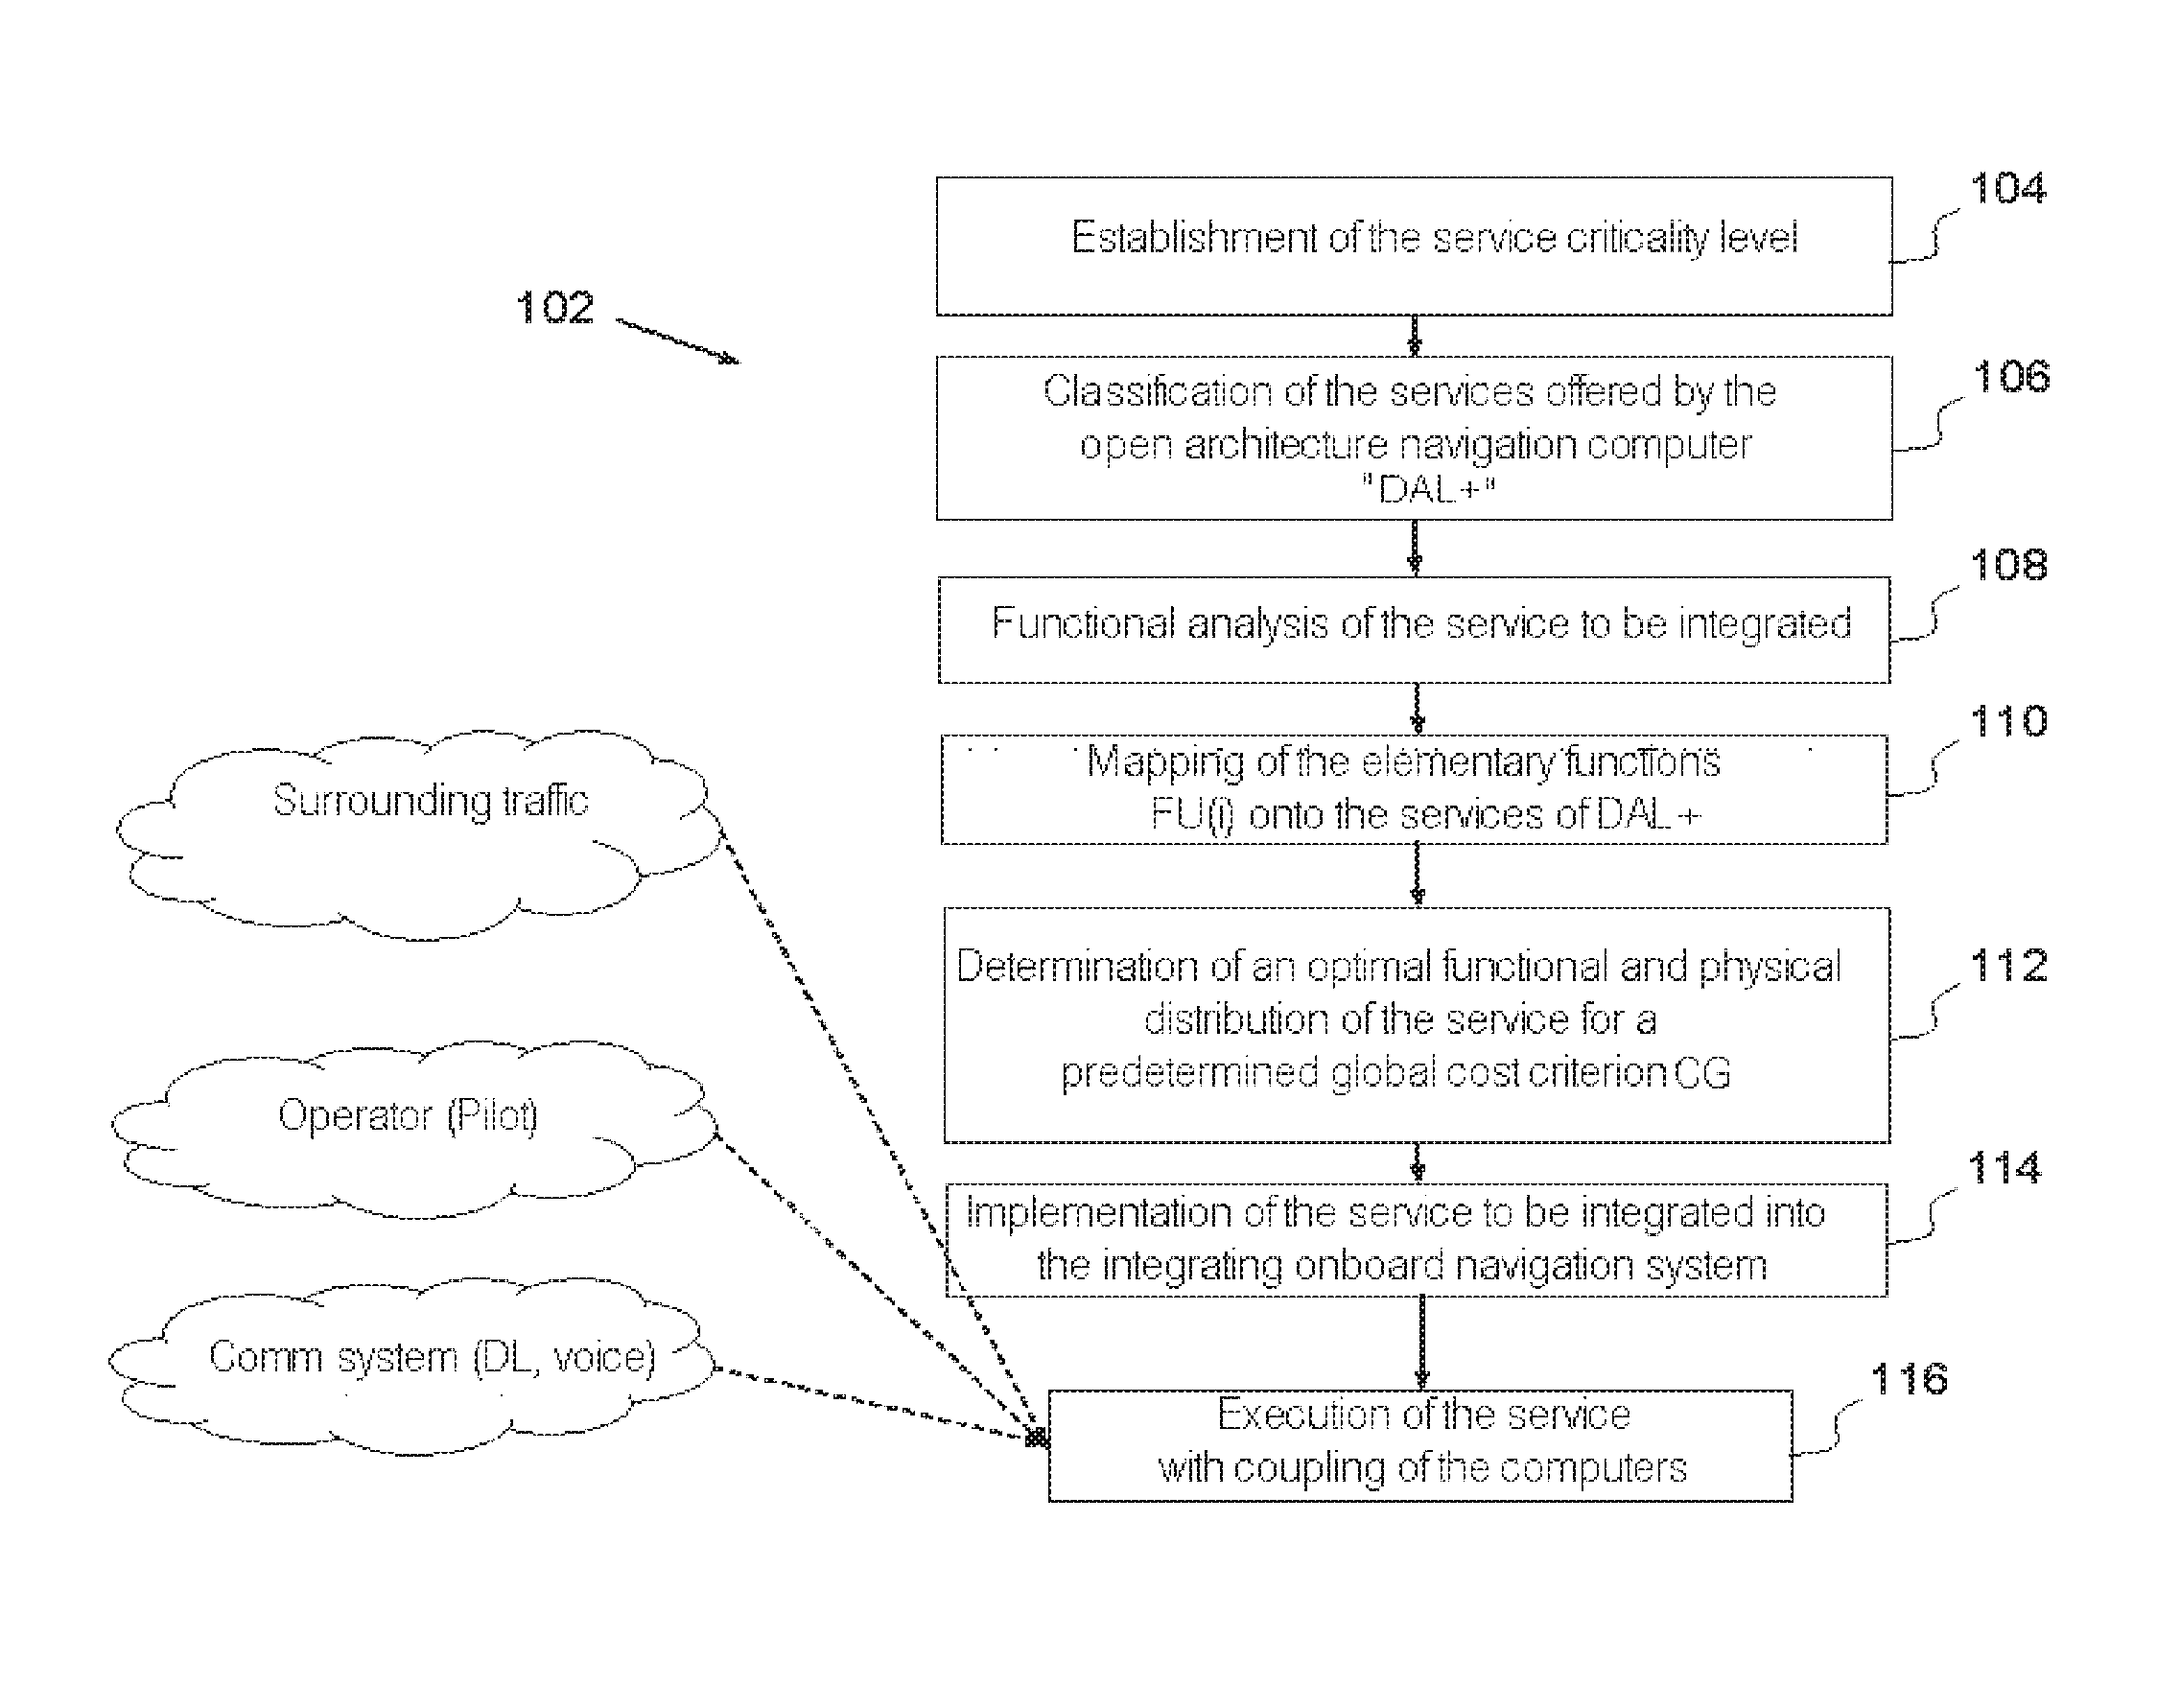 Method for integrating a new service into an avionics onboard system with open architecture of client-server type, in particular for an fim manoeuvre service